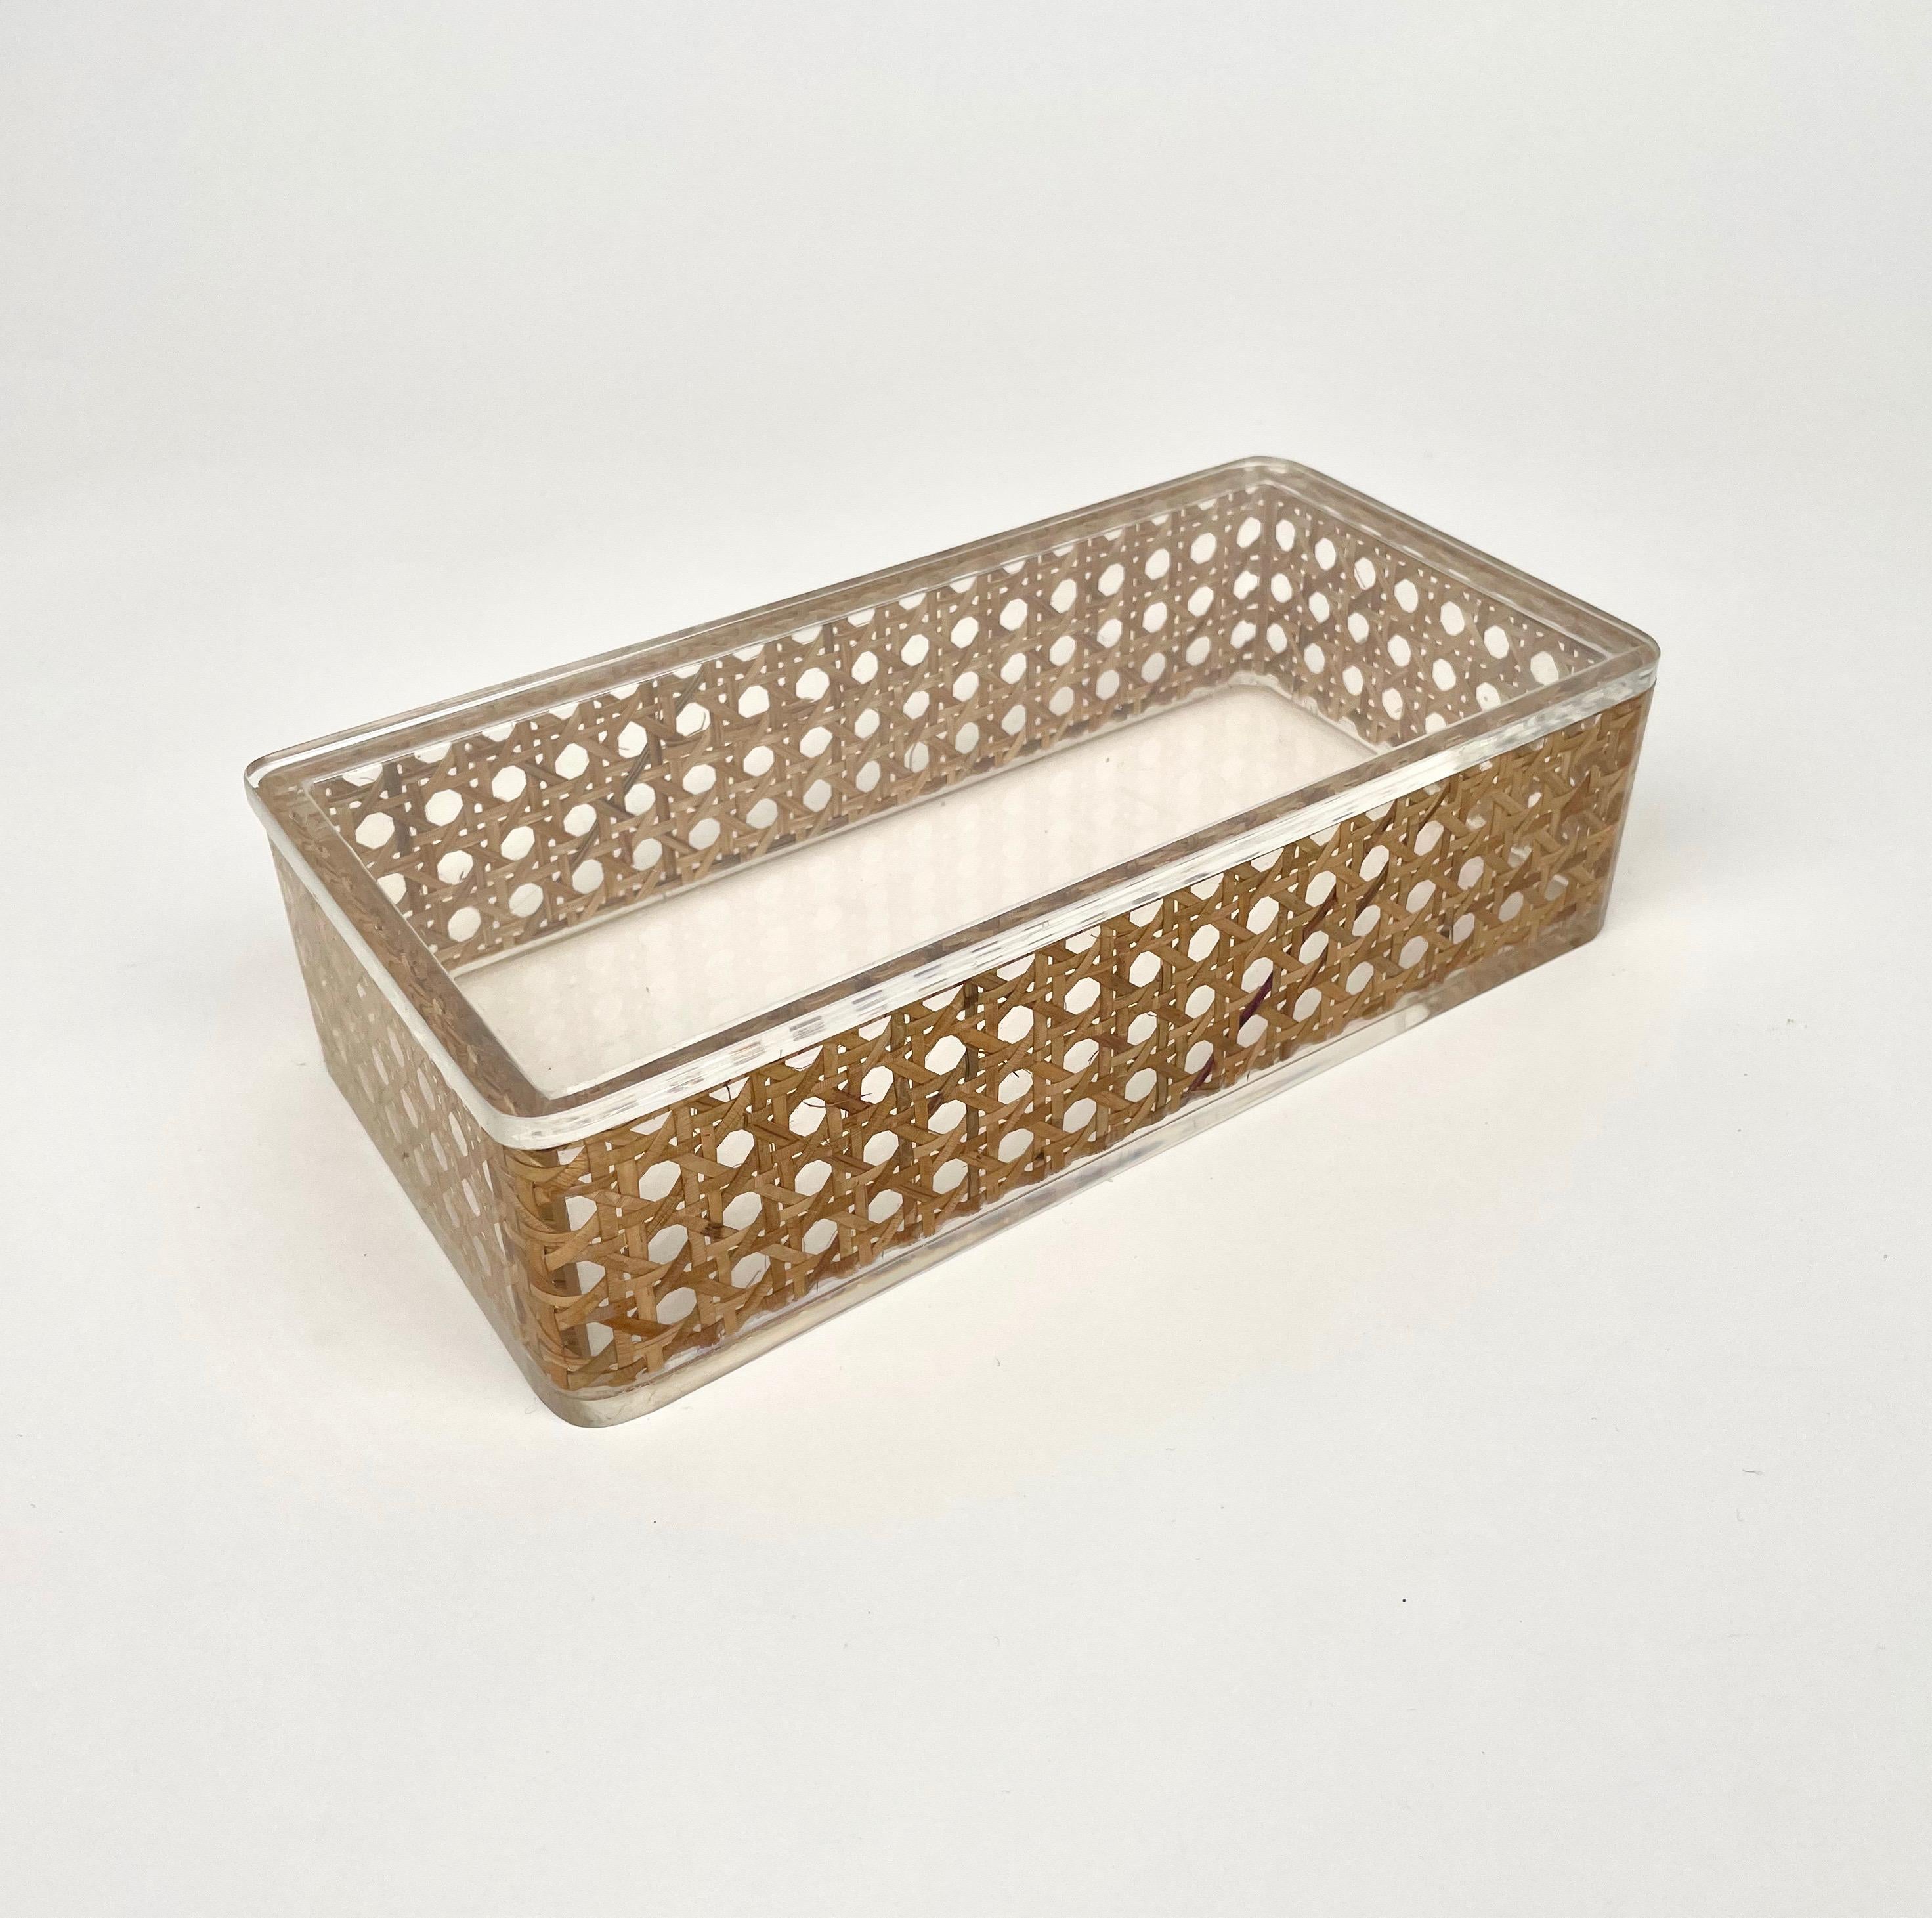 Rectangular box in lucite and rattan in the style of Christian Dior Home. 

 Made in Italy in the 1970s.